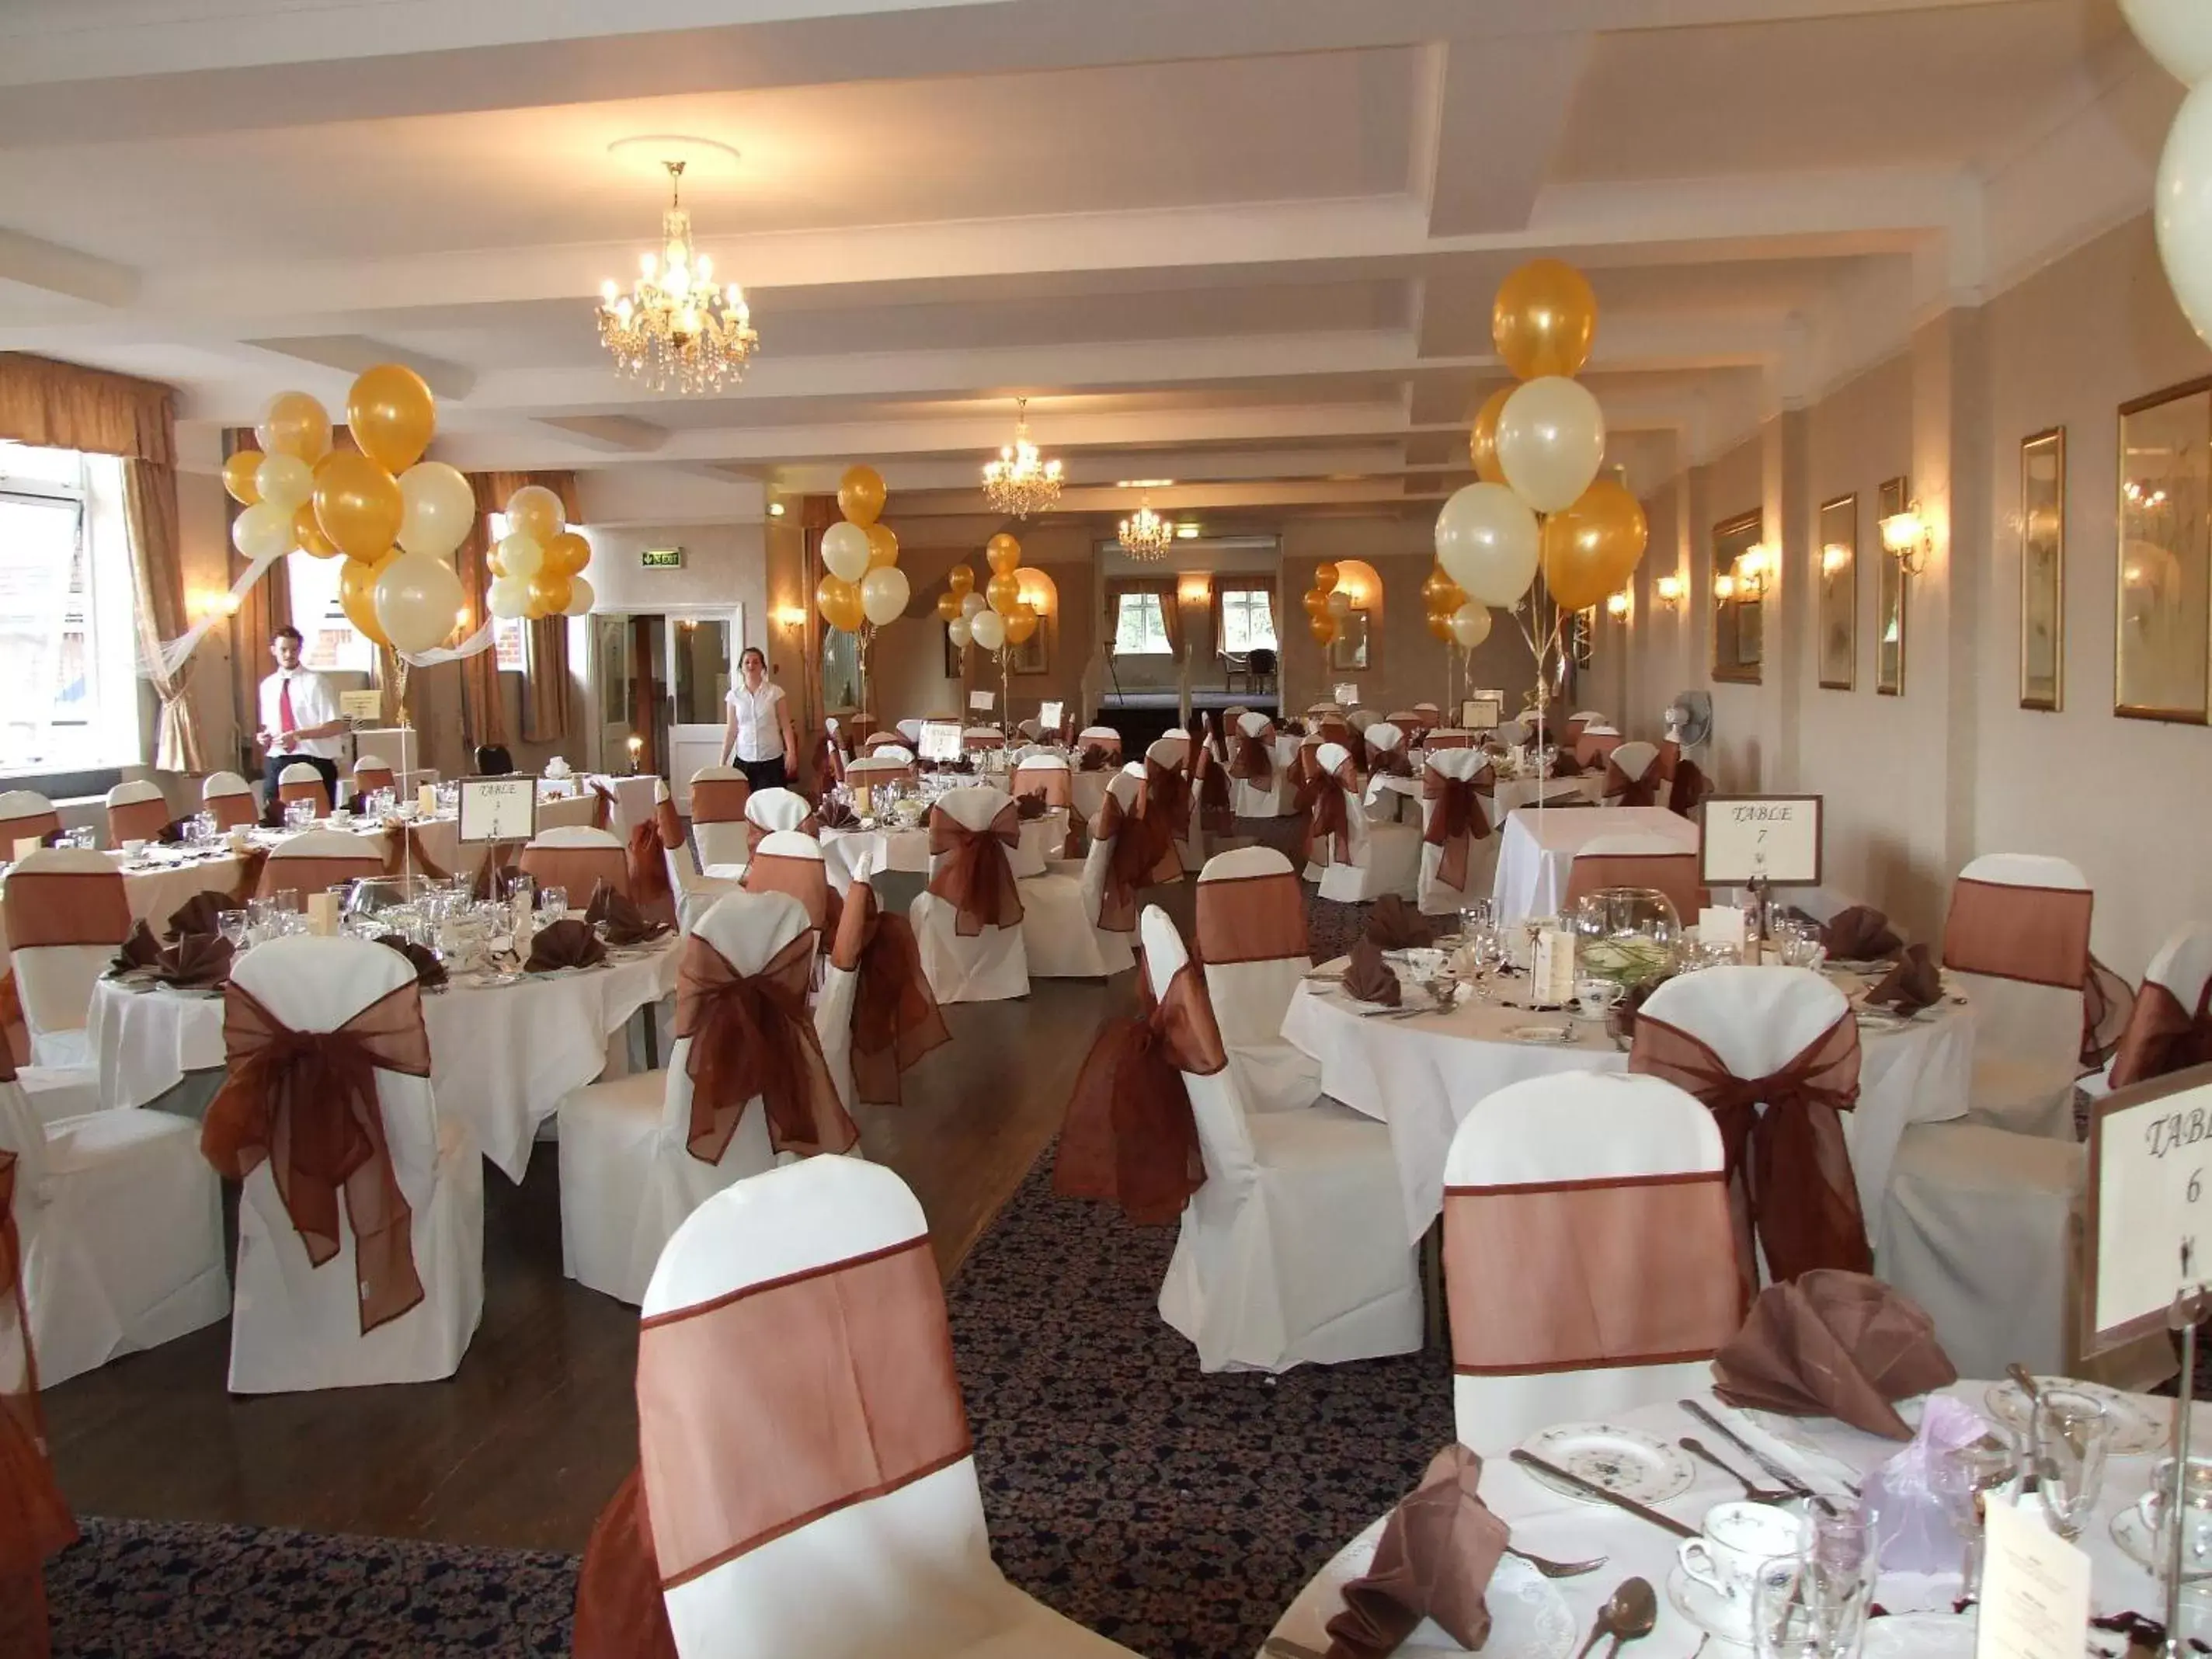 Banquet/Function facilities, Banquet Facilities in Best Western Thurrock Hotel